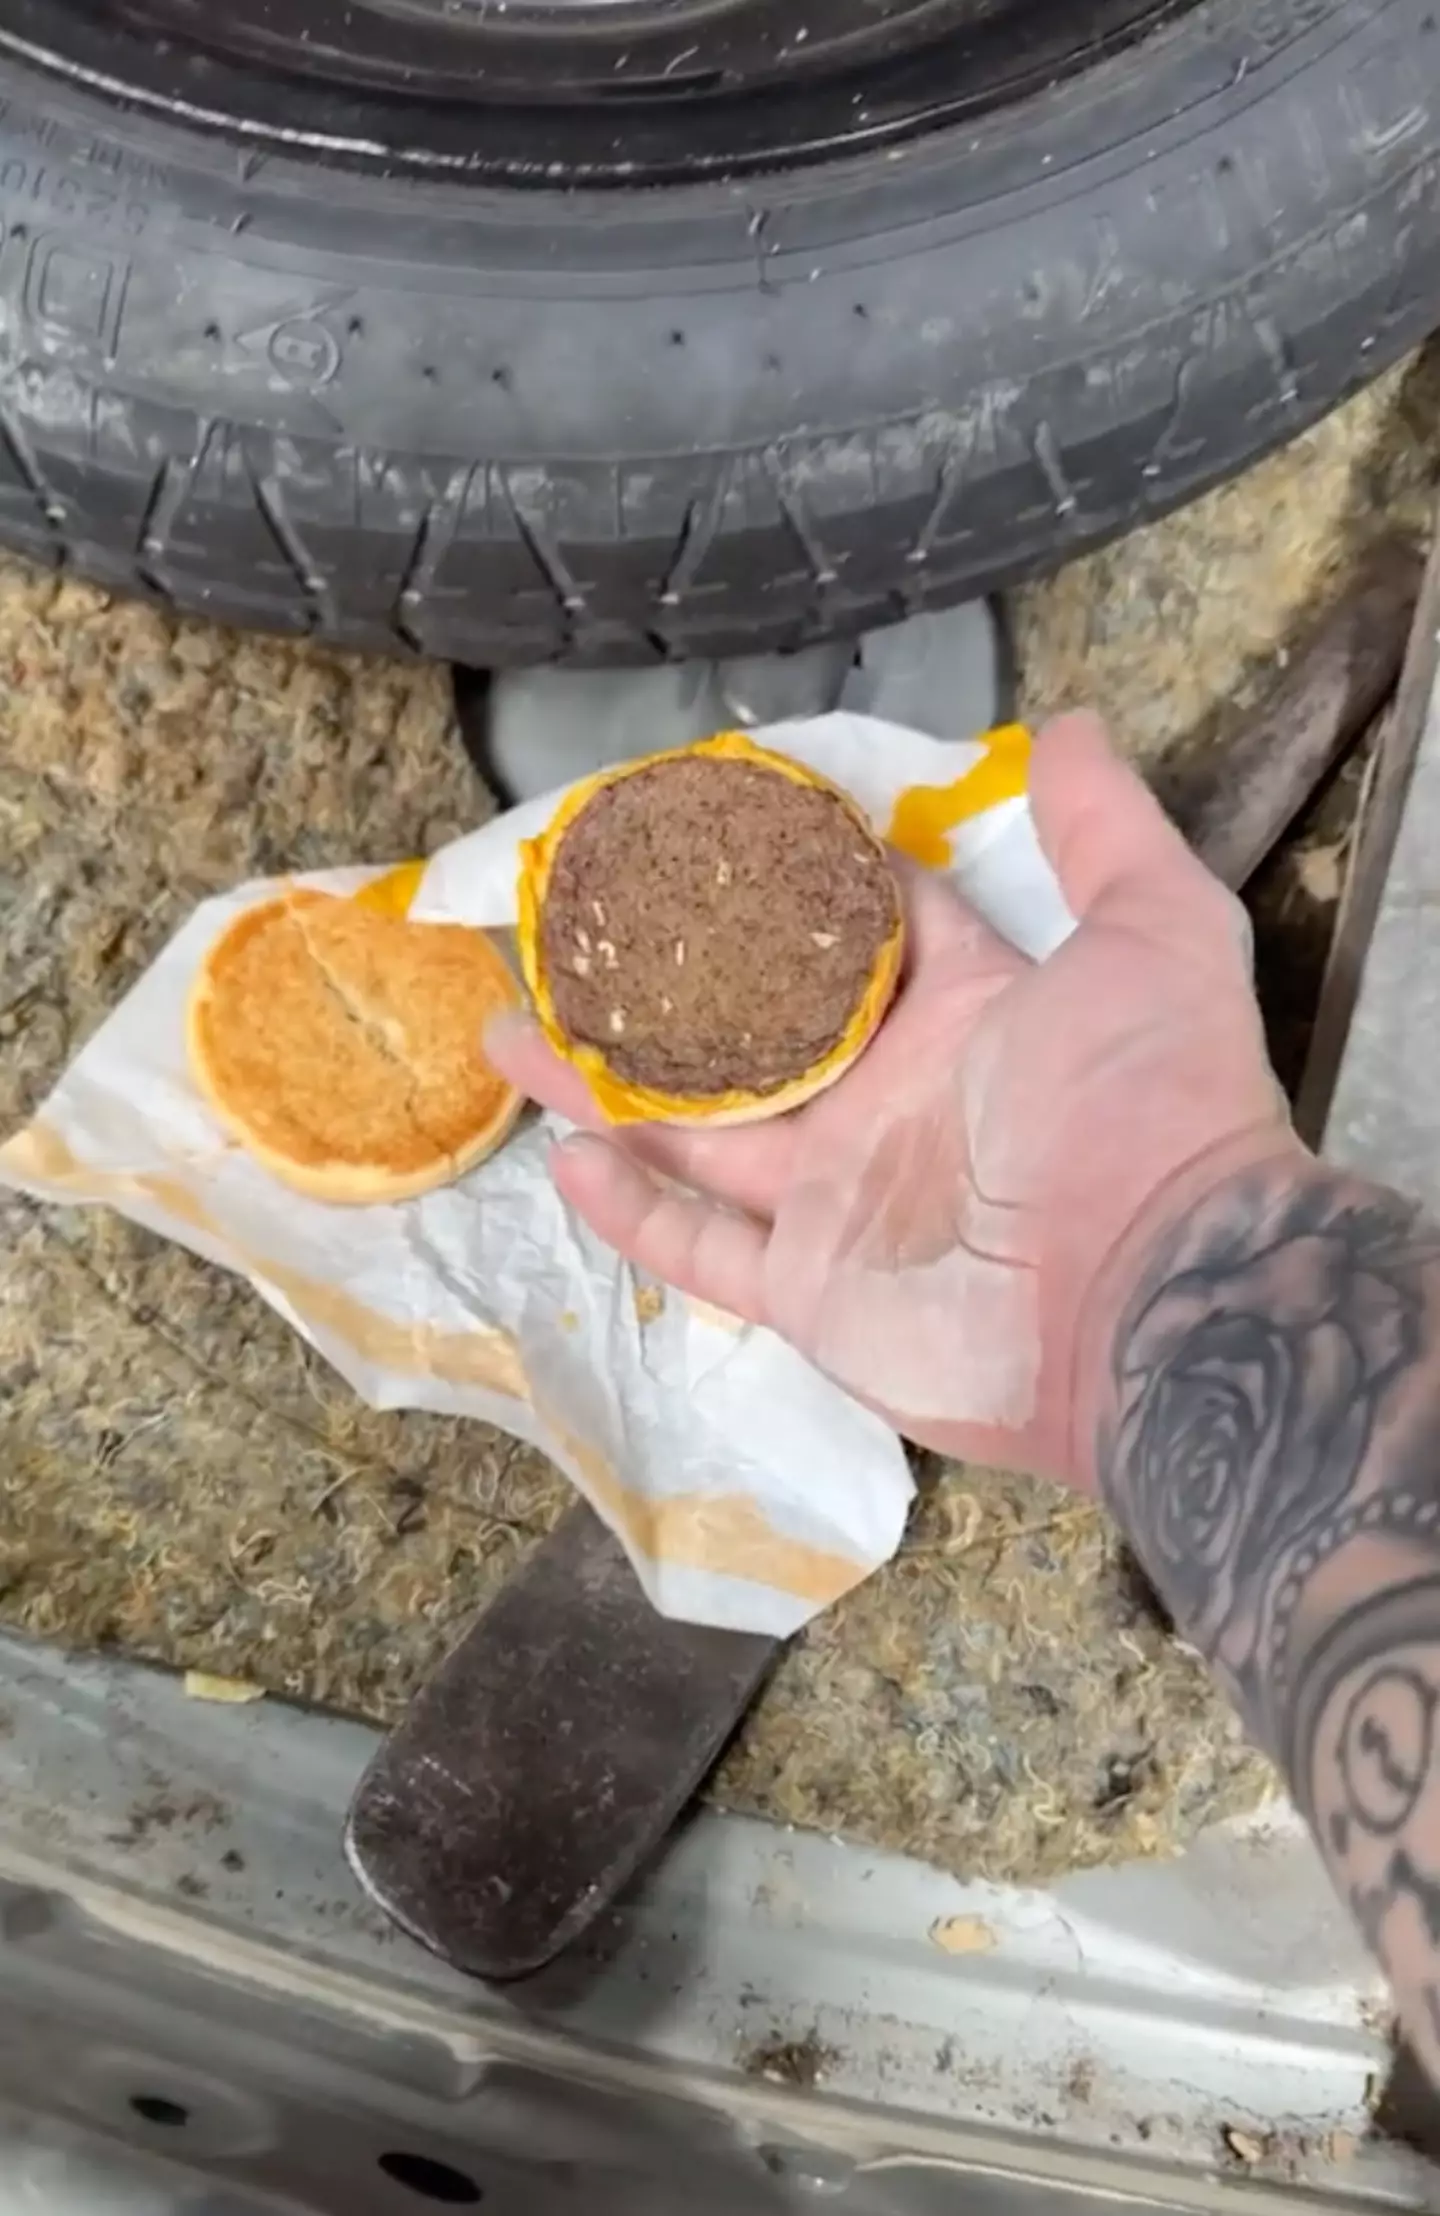 Cameron Holland found an old McDonalds cheeseburger in the back of a car at work.